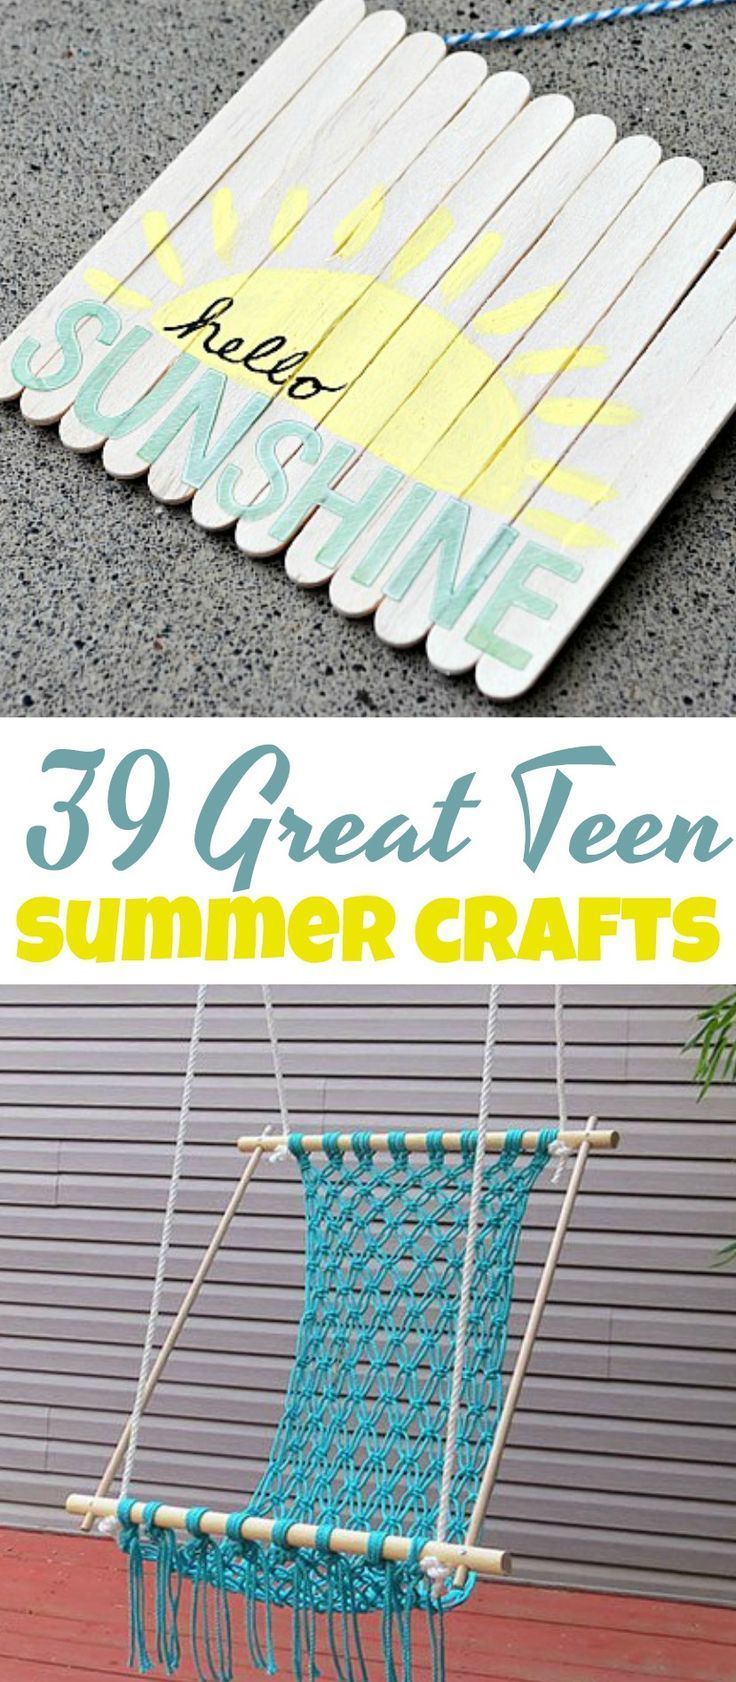 39 Great Teen Summer Crafts - A Little Craft In Your Day - 39 Great Teen Summer Crafts - A Little Craft In Your Day -   17 diy Projects for summer ideas